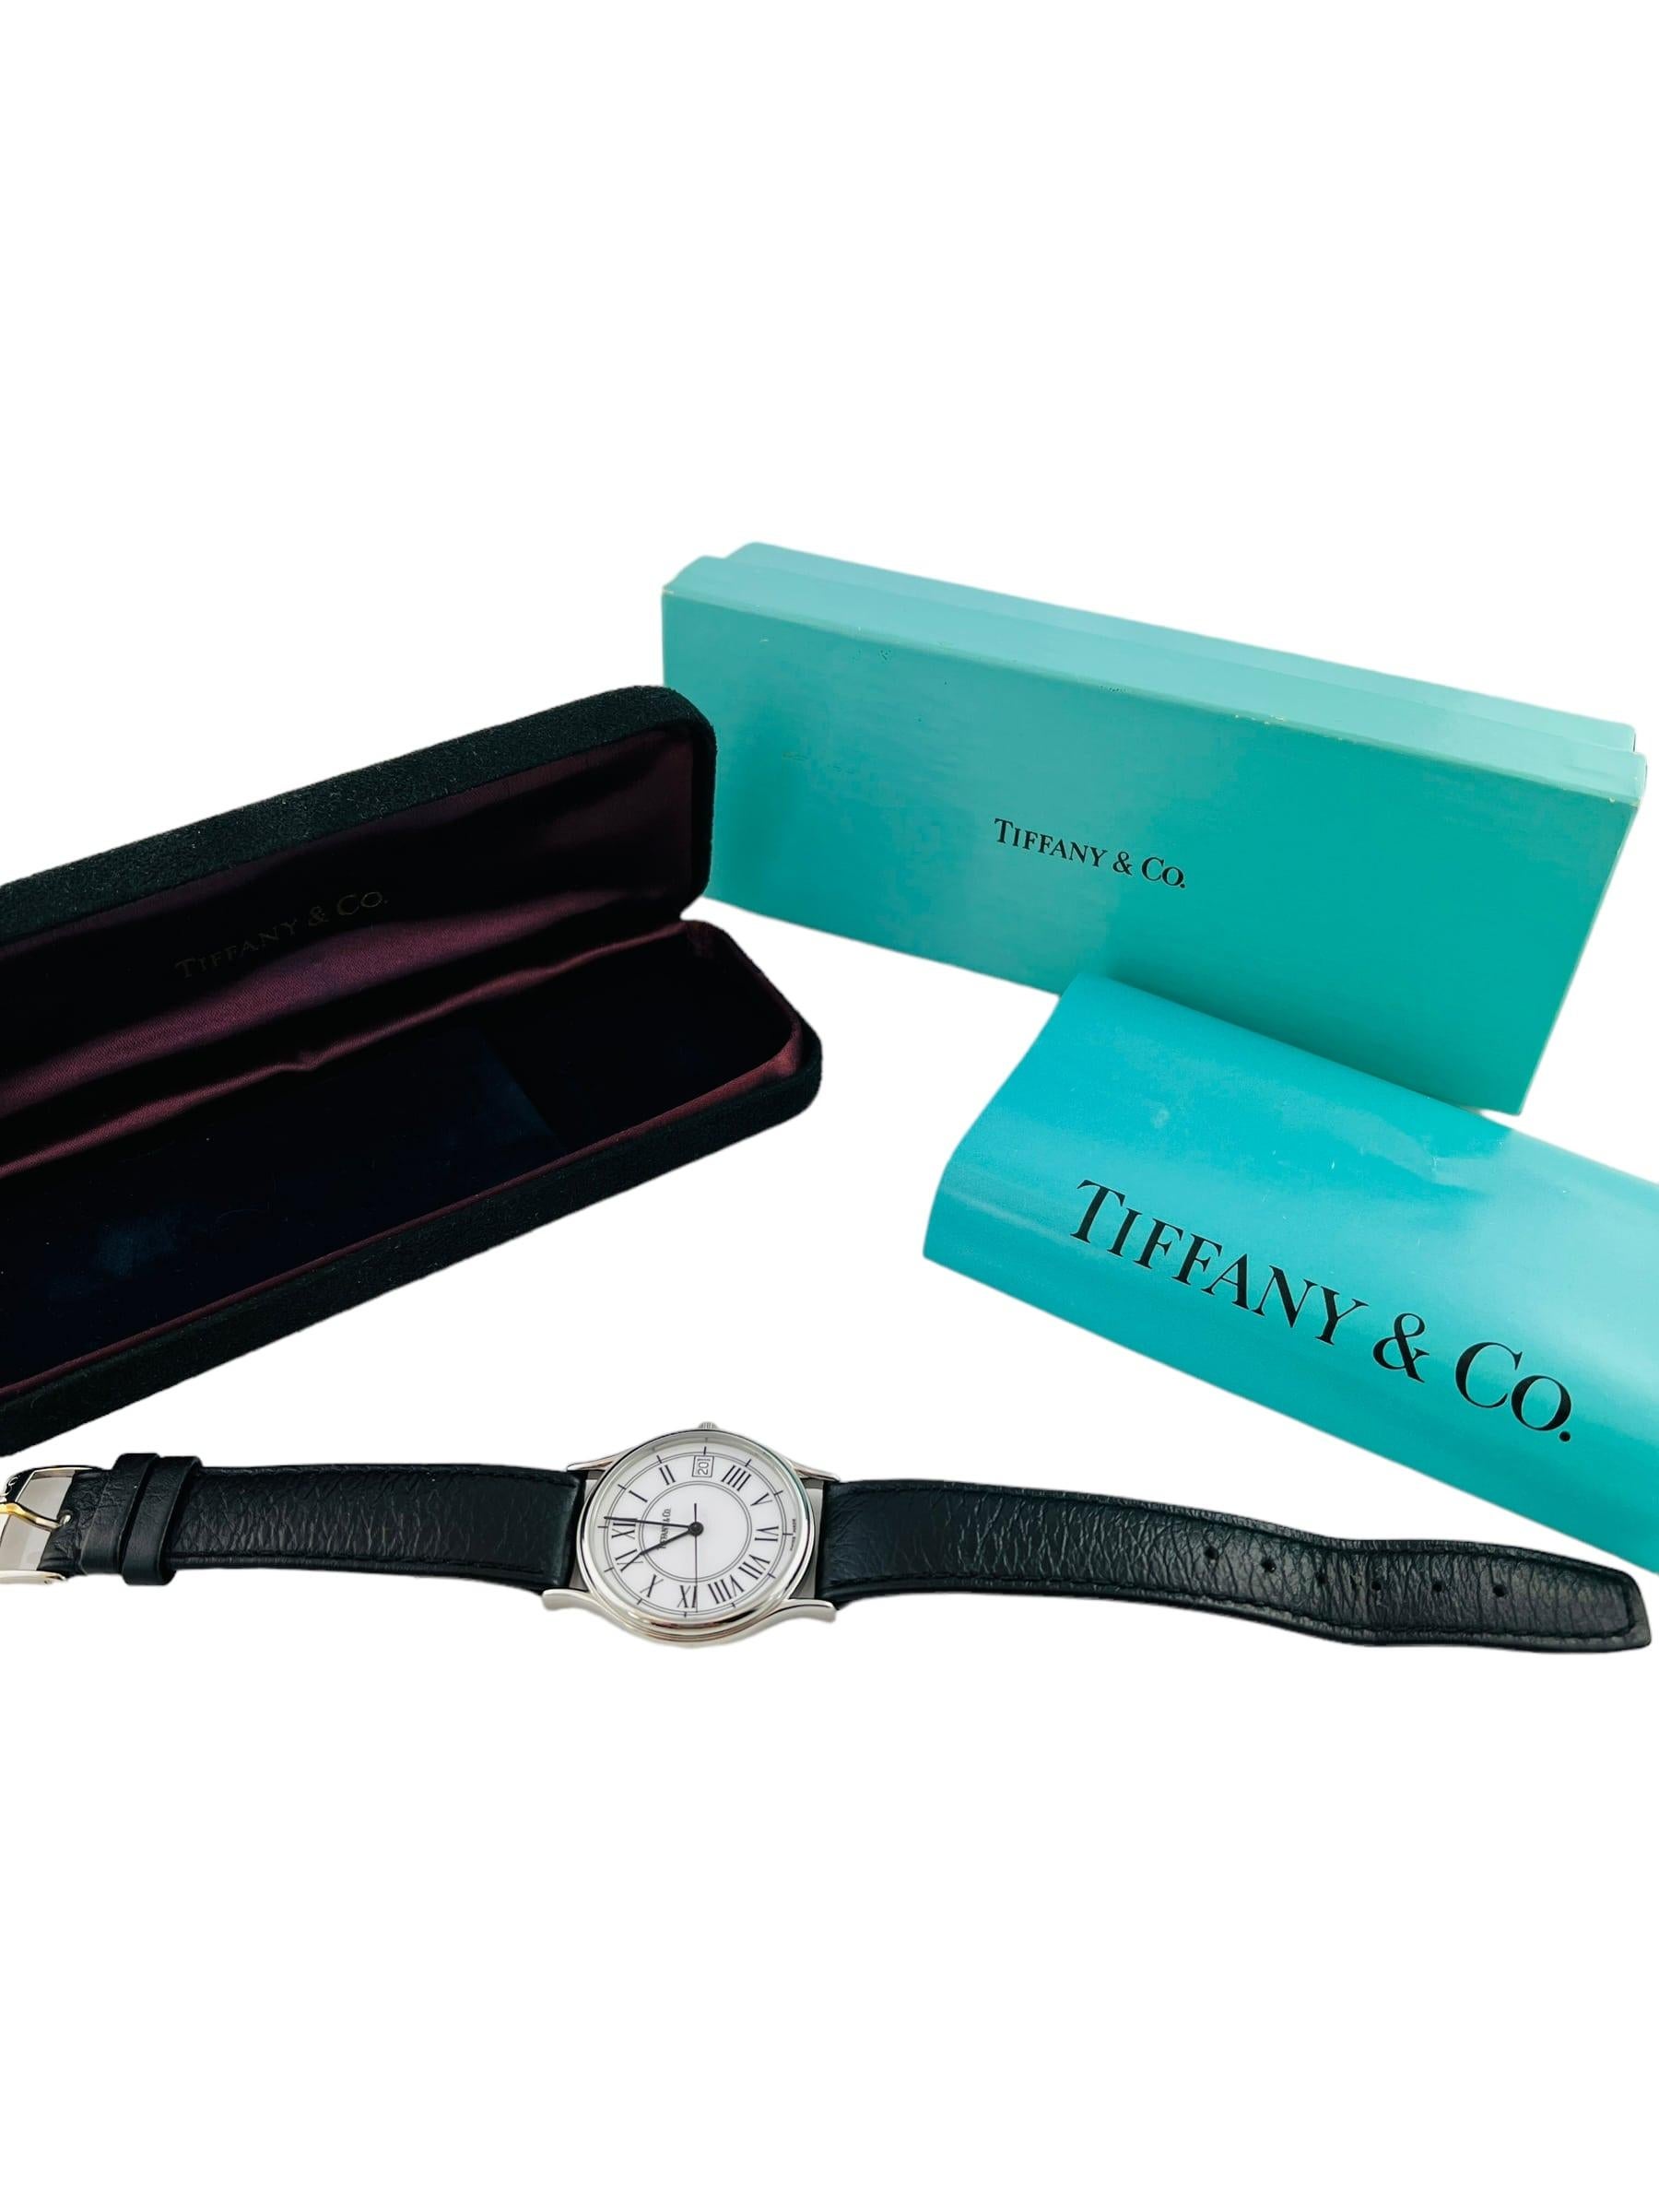 Tiffany & Co. Classic Watch 

This classic Tiffany & Co. watch is set in stainless steel with a leather band

Stainless steel case is 33mm in diameter

Quartz movement

Tiffany & Co. Leather band with Tiffany stainless buckle

Watch is 9